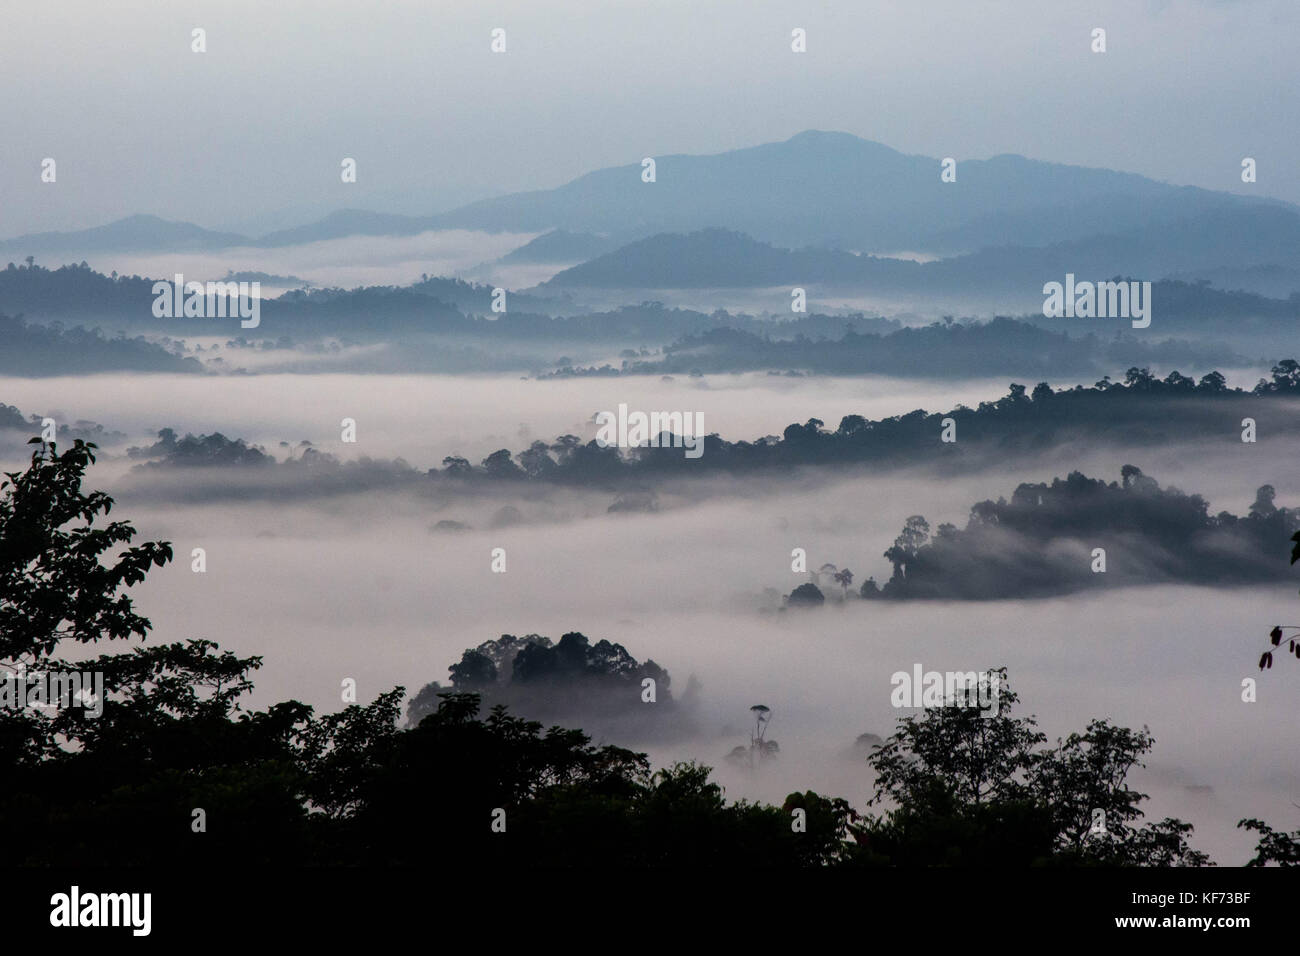 Danum Valley in the early morning light before the sun comes up and burns the clouds away. Stock Photo